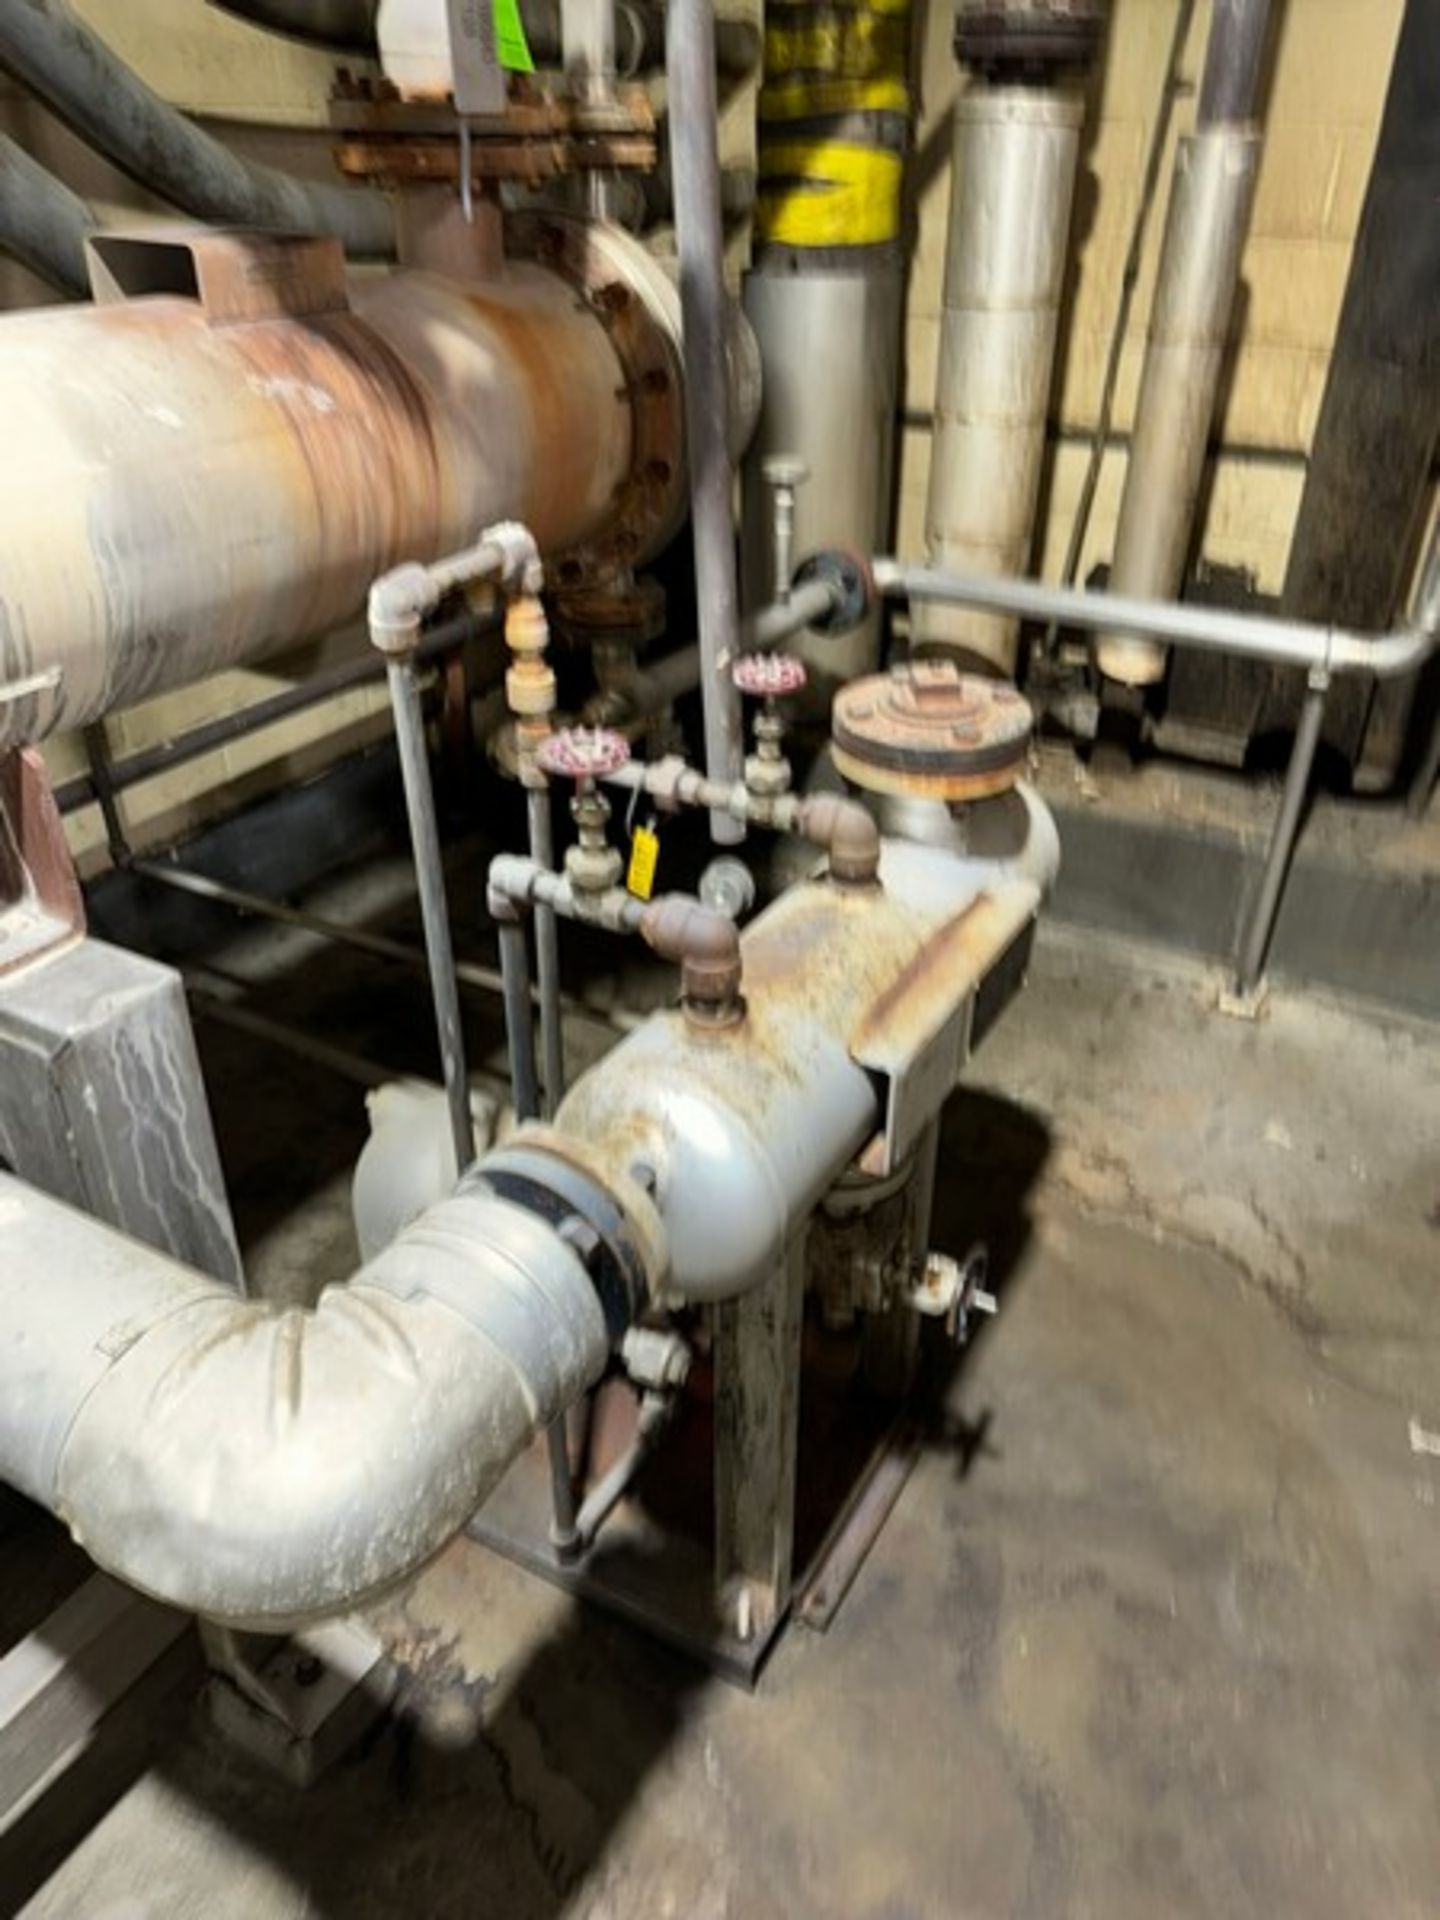 Shell & Tube Heat Exchanger, with Associated Piping & Components (LOCATED IN FREEHOLD, N.J.) - Image 3 of 3